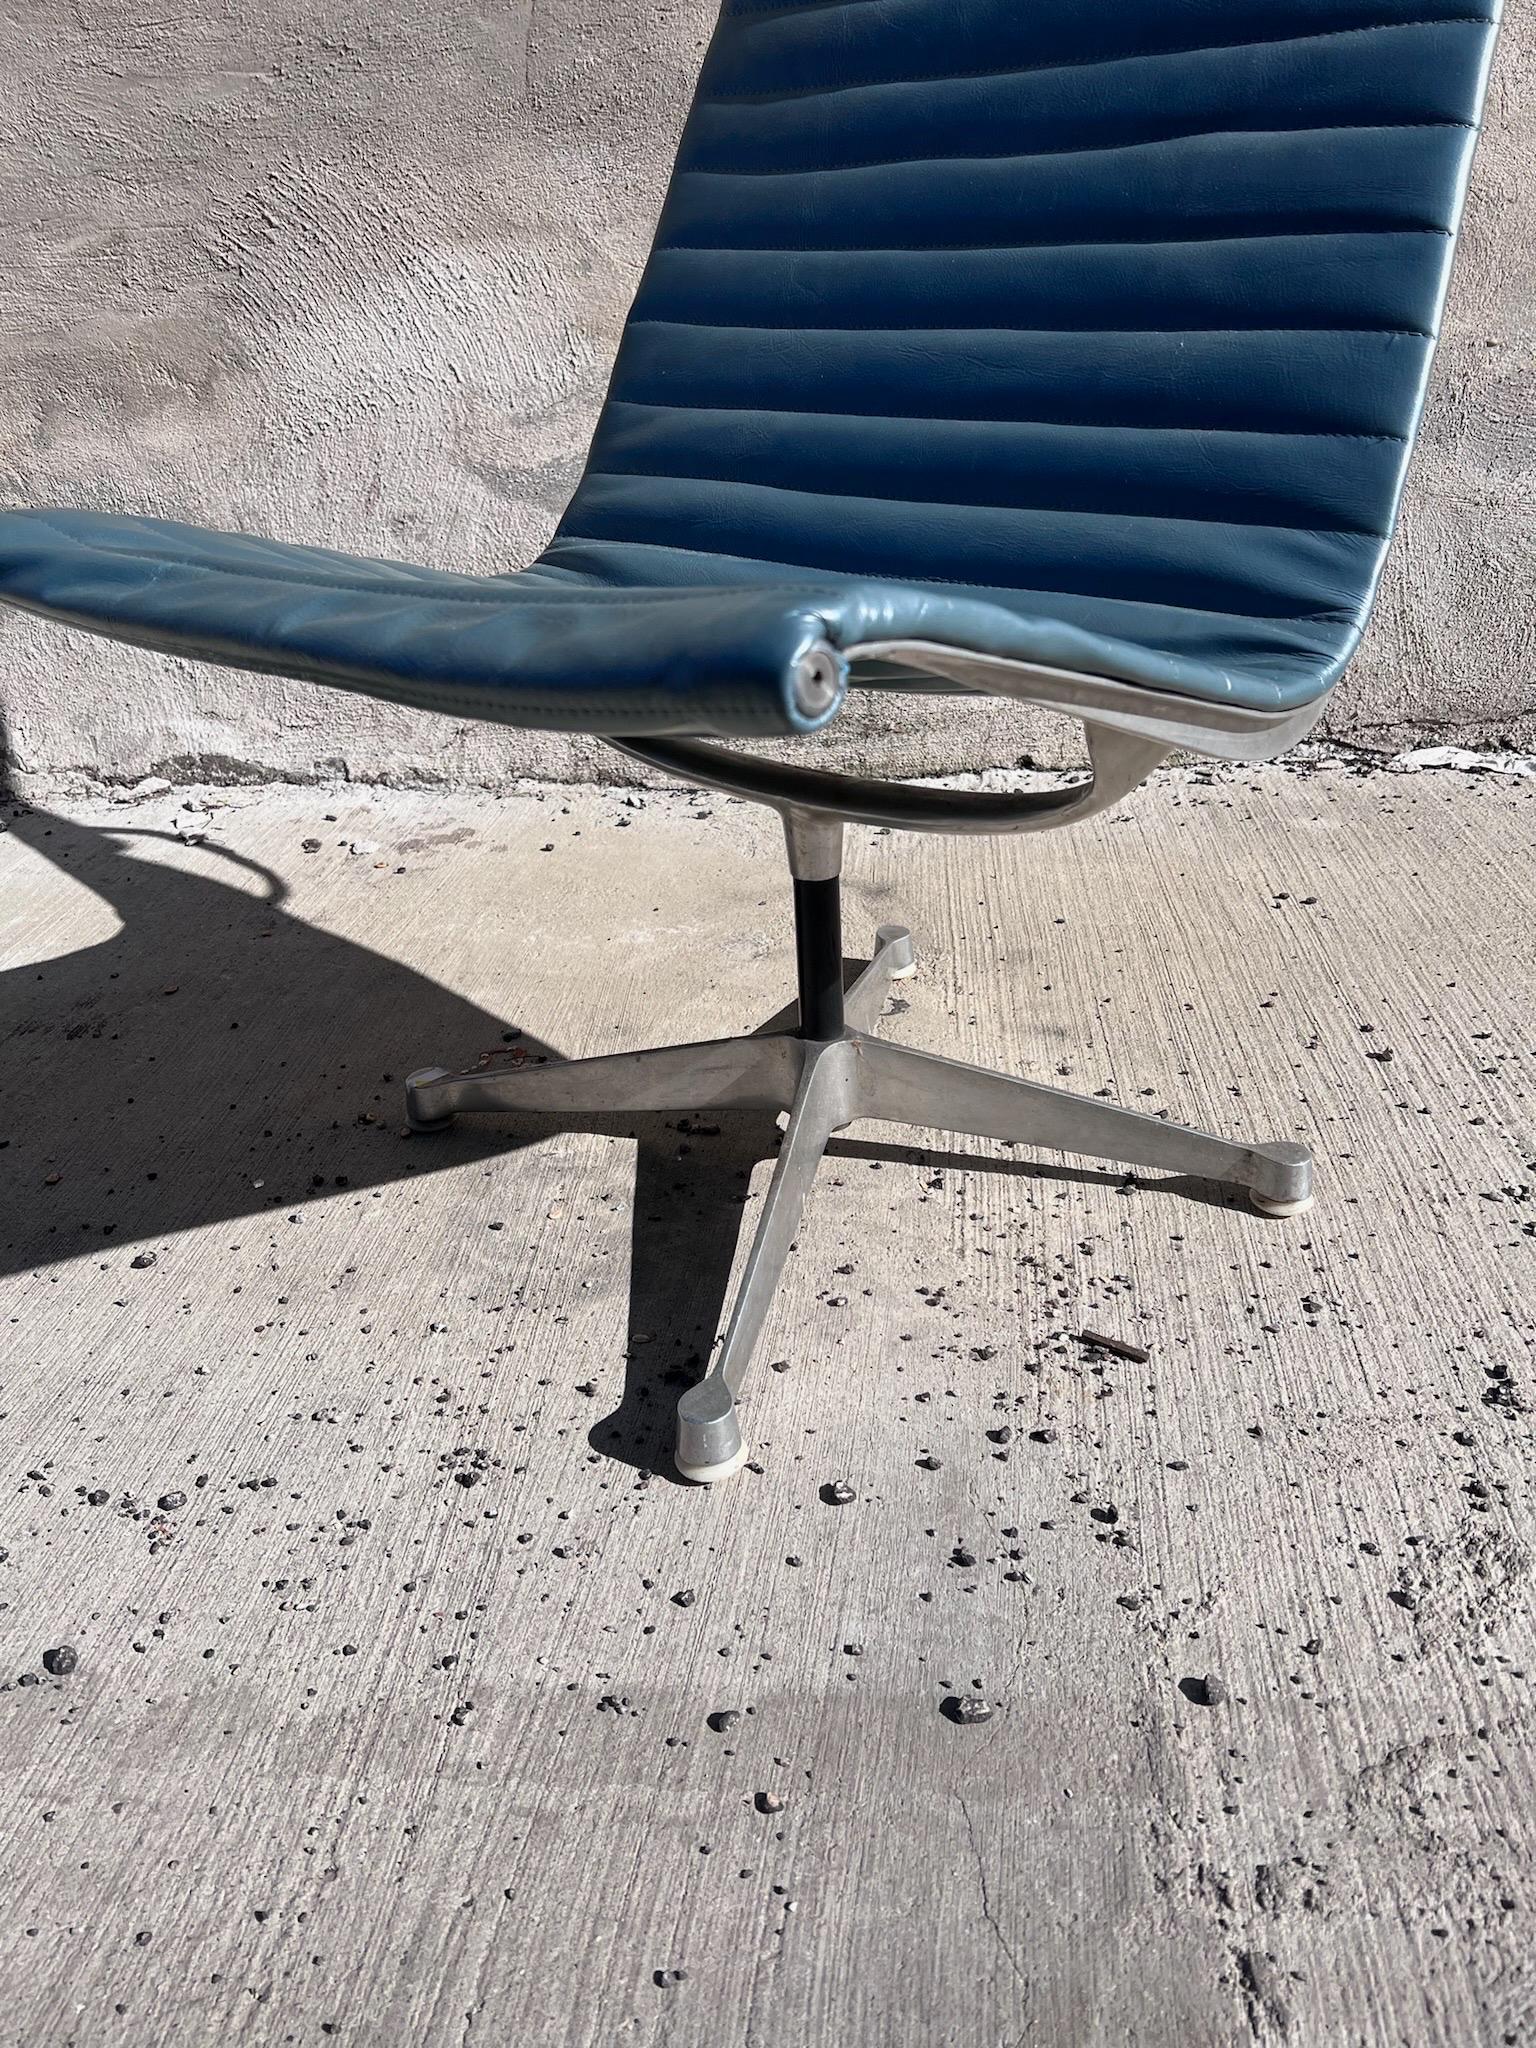 Mid Century Modern Aluminum Group Swivel Lounge Chair for Herman Miller Newly Reupholstered in a Holly Hunt Metallic Teal Leather 

This is an Iconic Eames Aluminum Group Lounge Chair designed by Charles and Ray Eames for Herman Miller in 1958. It